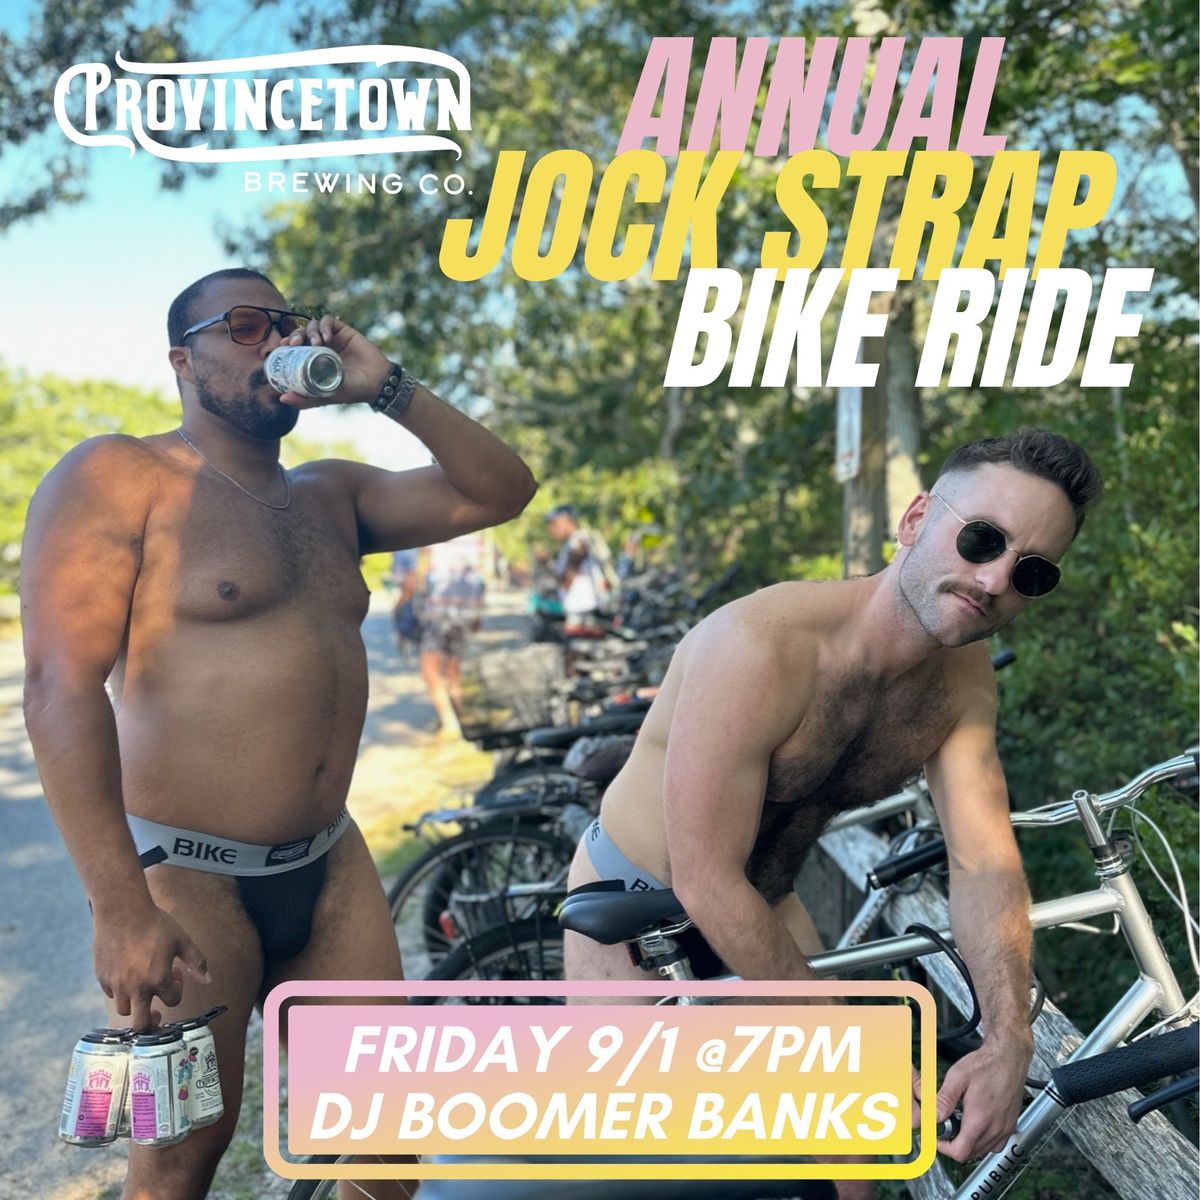 Provincetown Brewing Co. Hosts Annual Jockstrap Bike Ride: 'Letting Loose for Townie Summer Kickoff!'